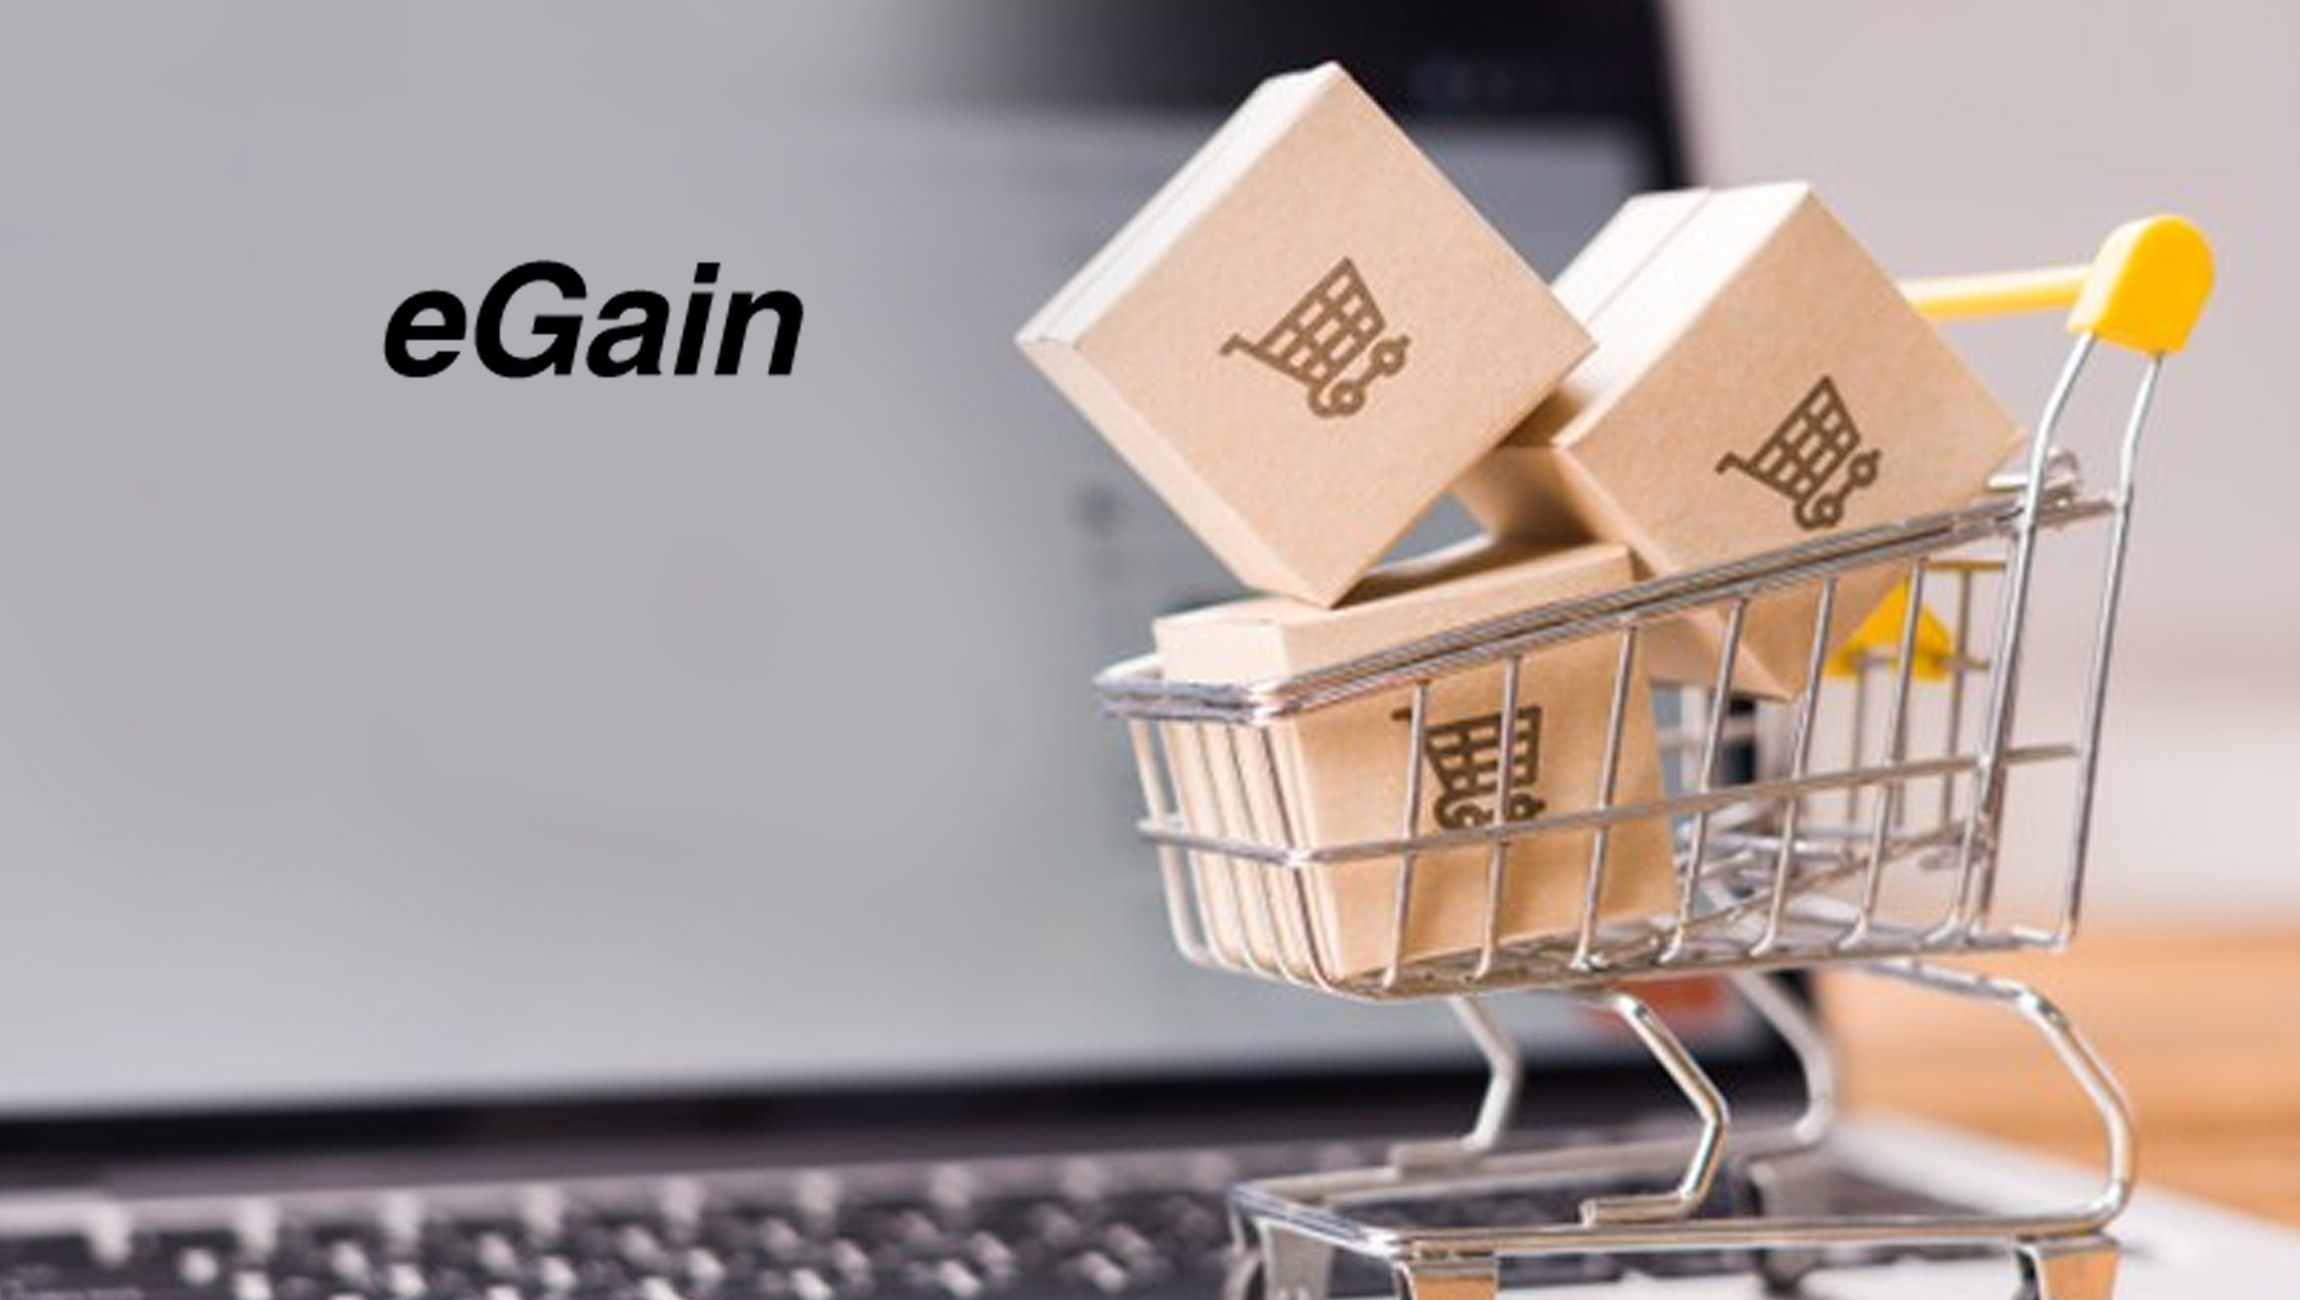 Hypergrowth Online Retailer Selects eGain Knowledge Hub™ to Deliver Wow Experiences